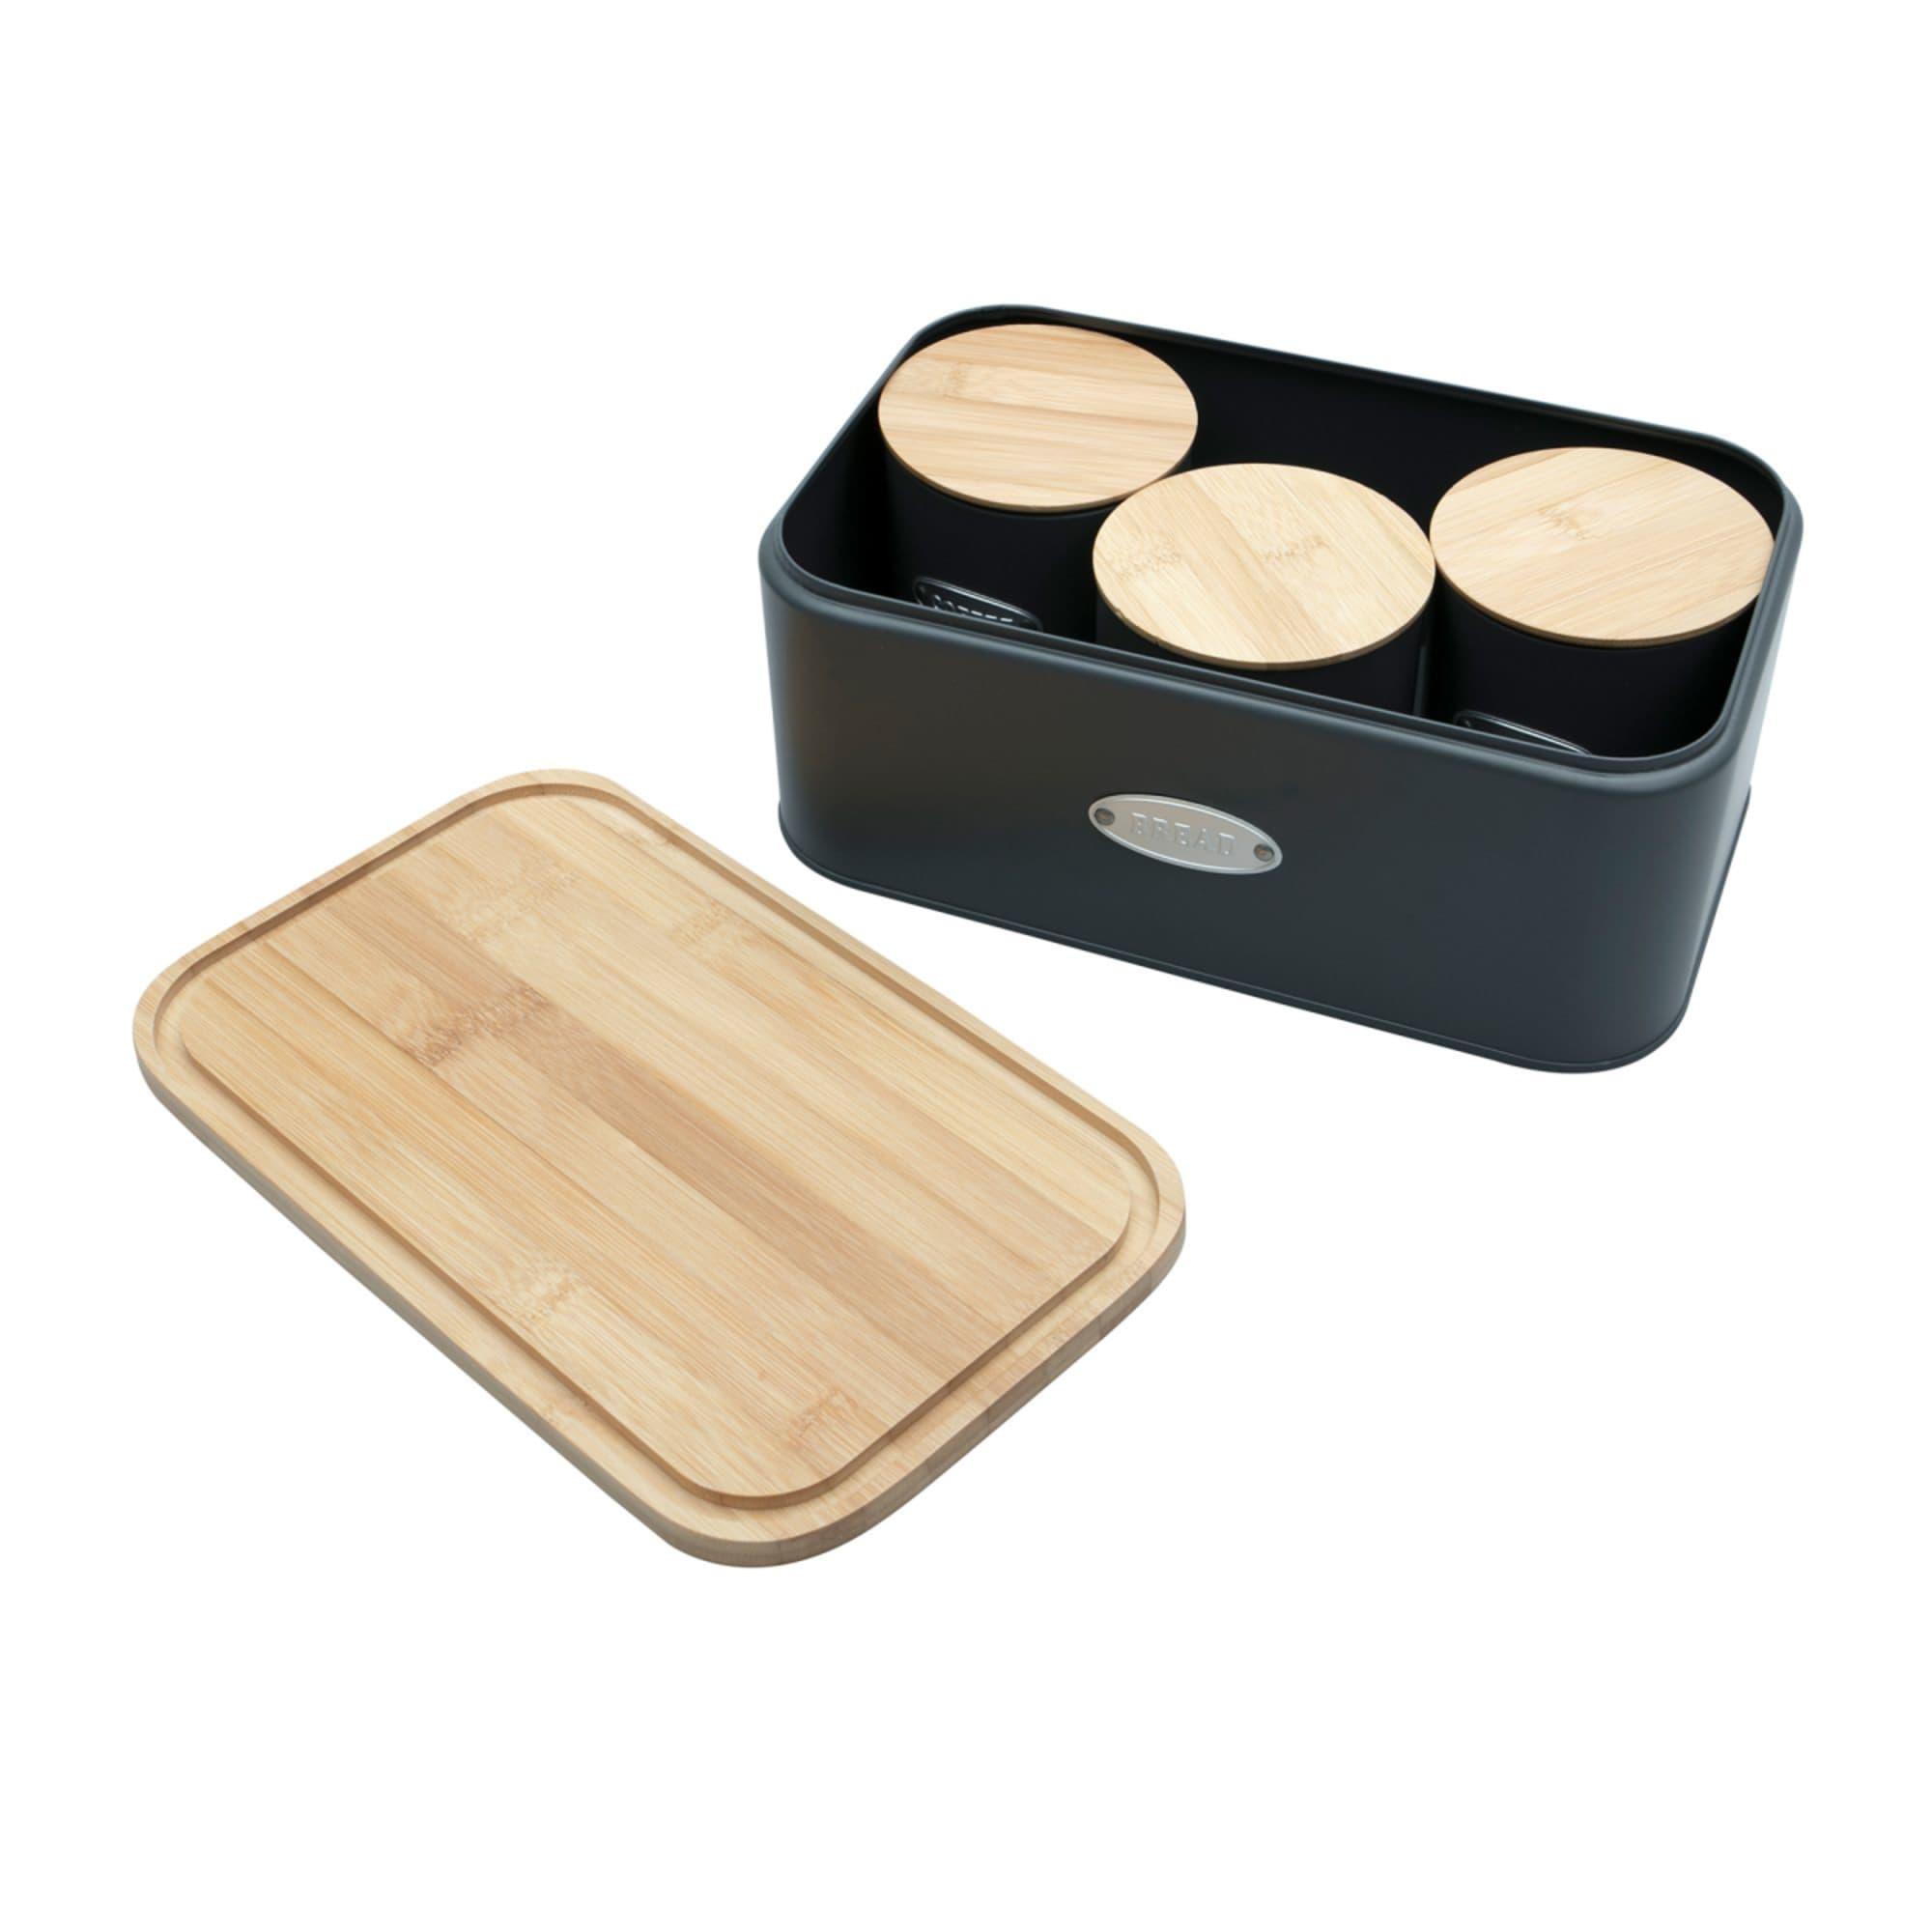 Sherwood Home Bread Box and Canister Set 4pc Image 6